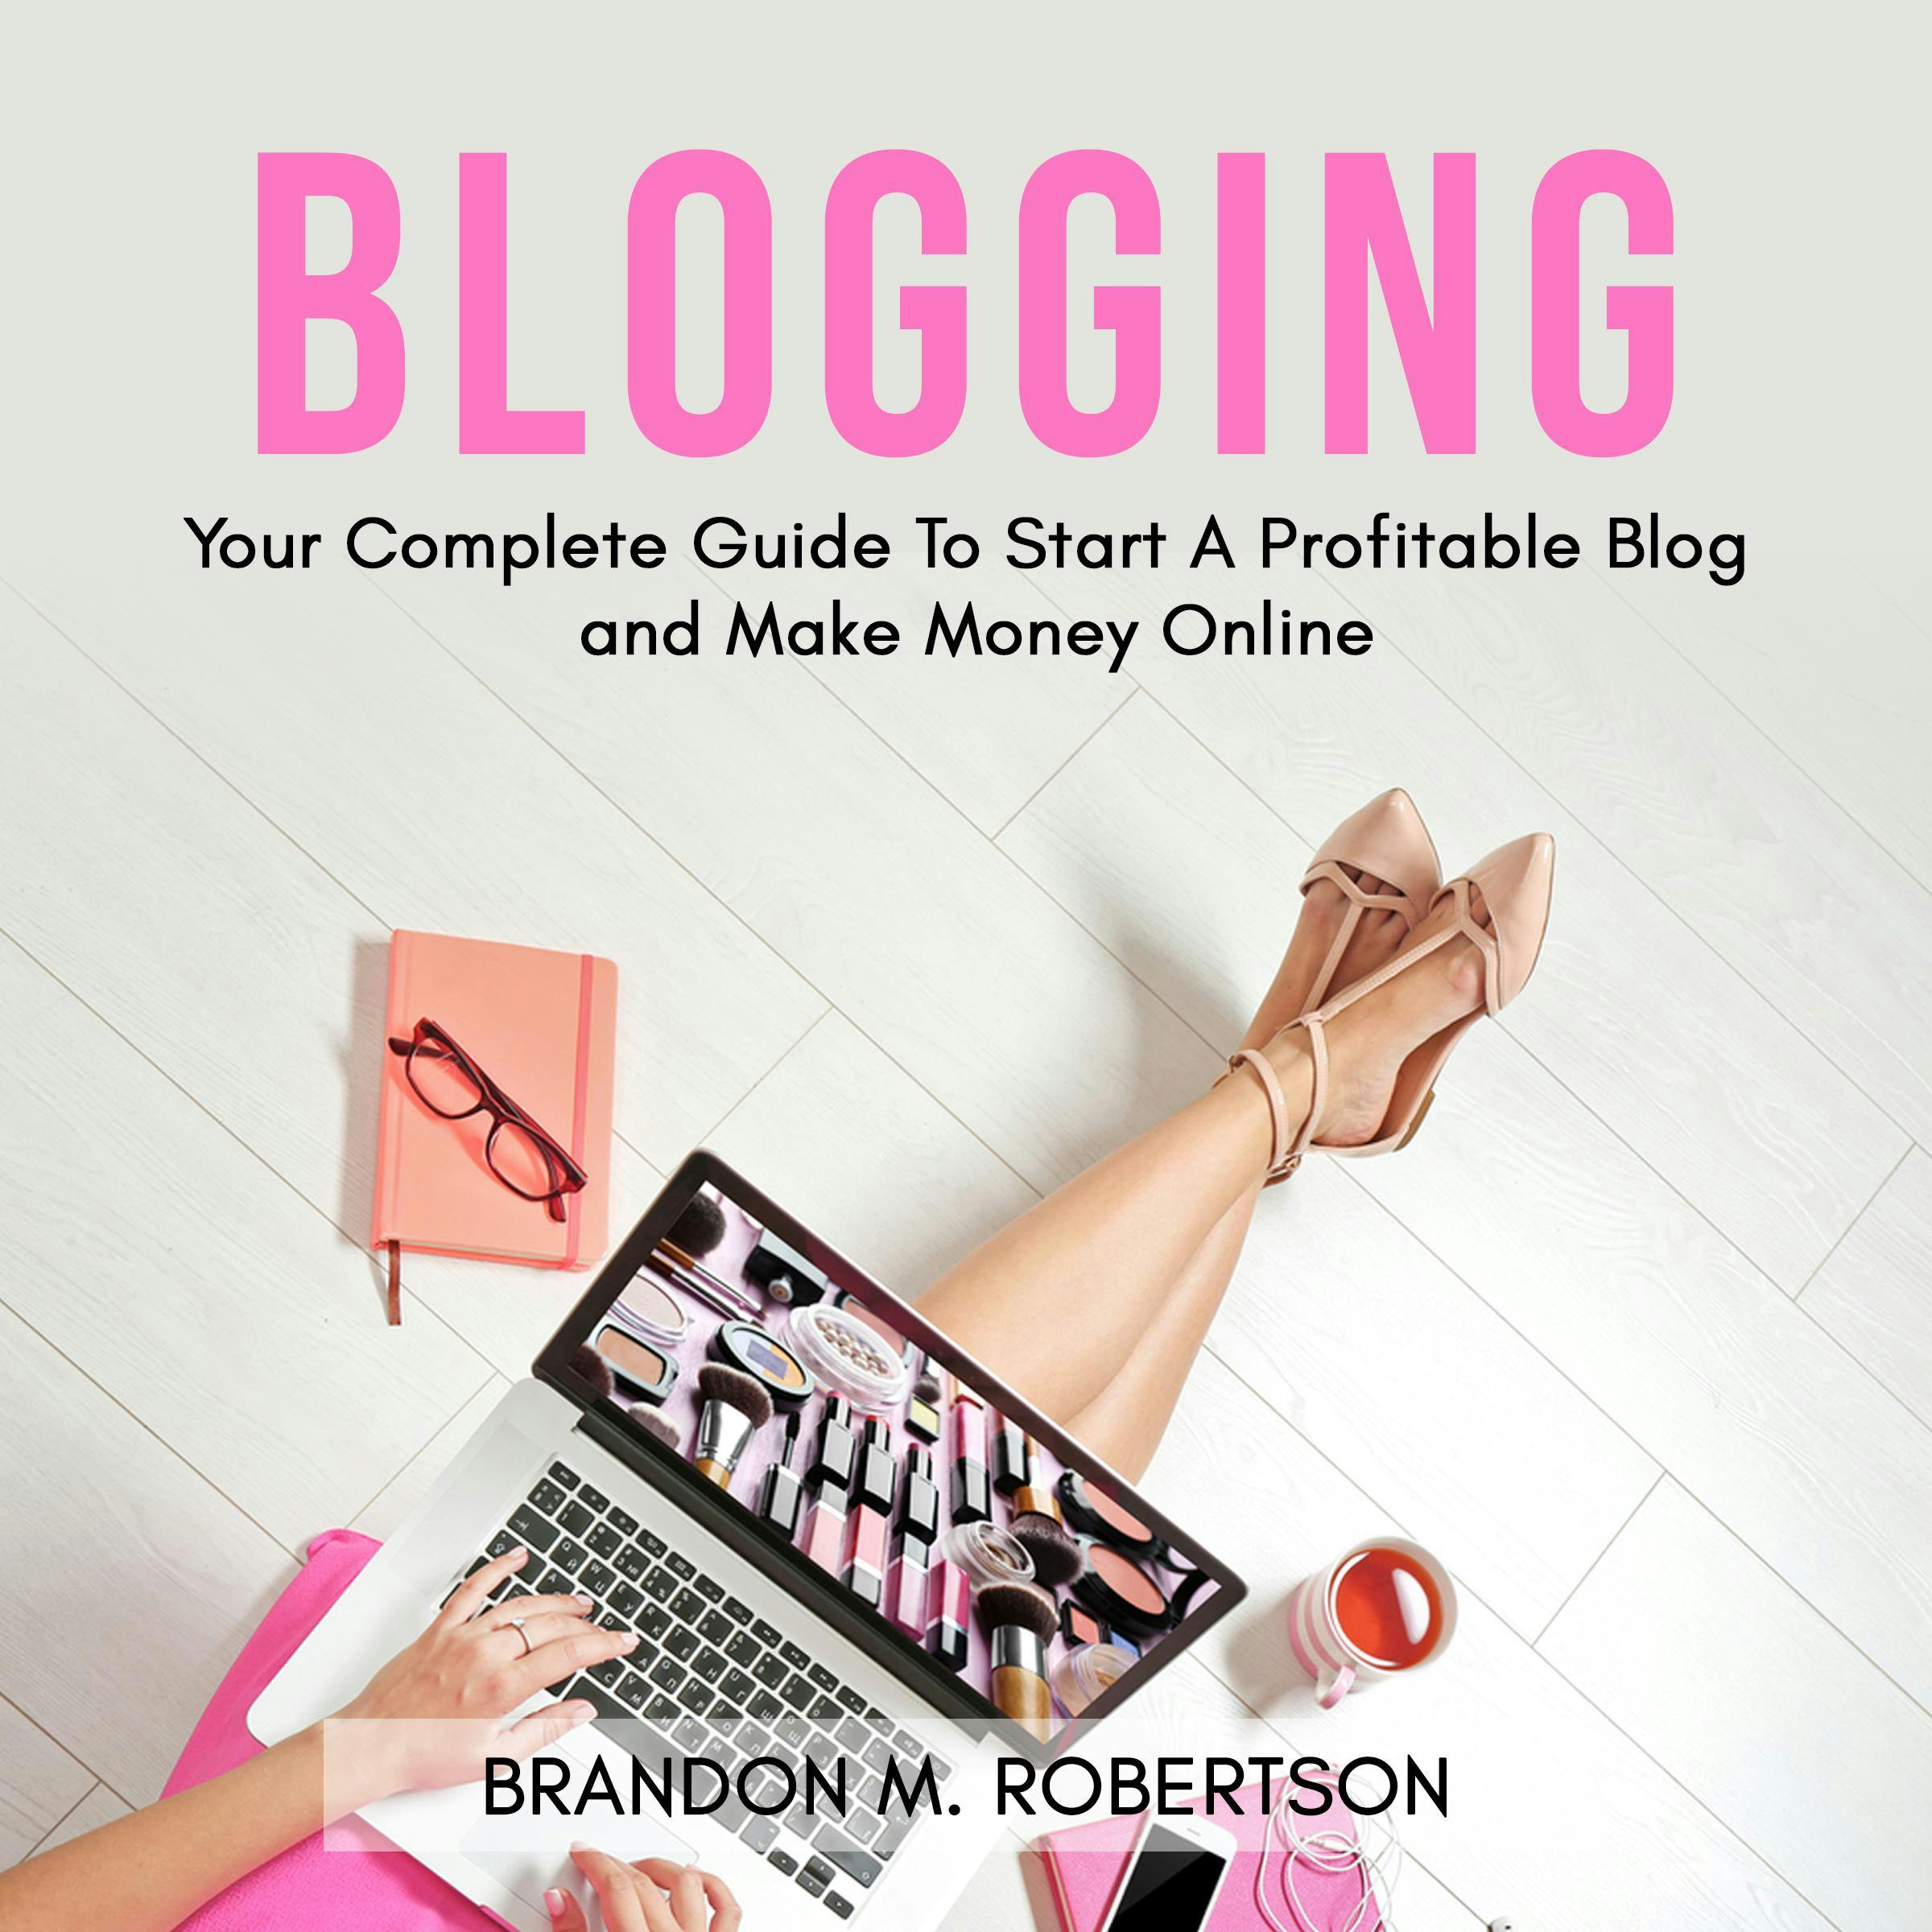 Blogging: Your Complete Guide To Start A Profitable Blog and Make Money Online - Brandon M. Robertson